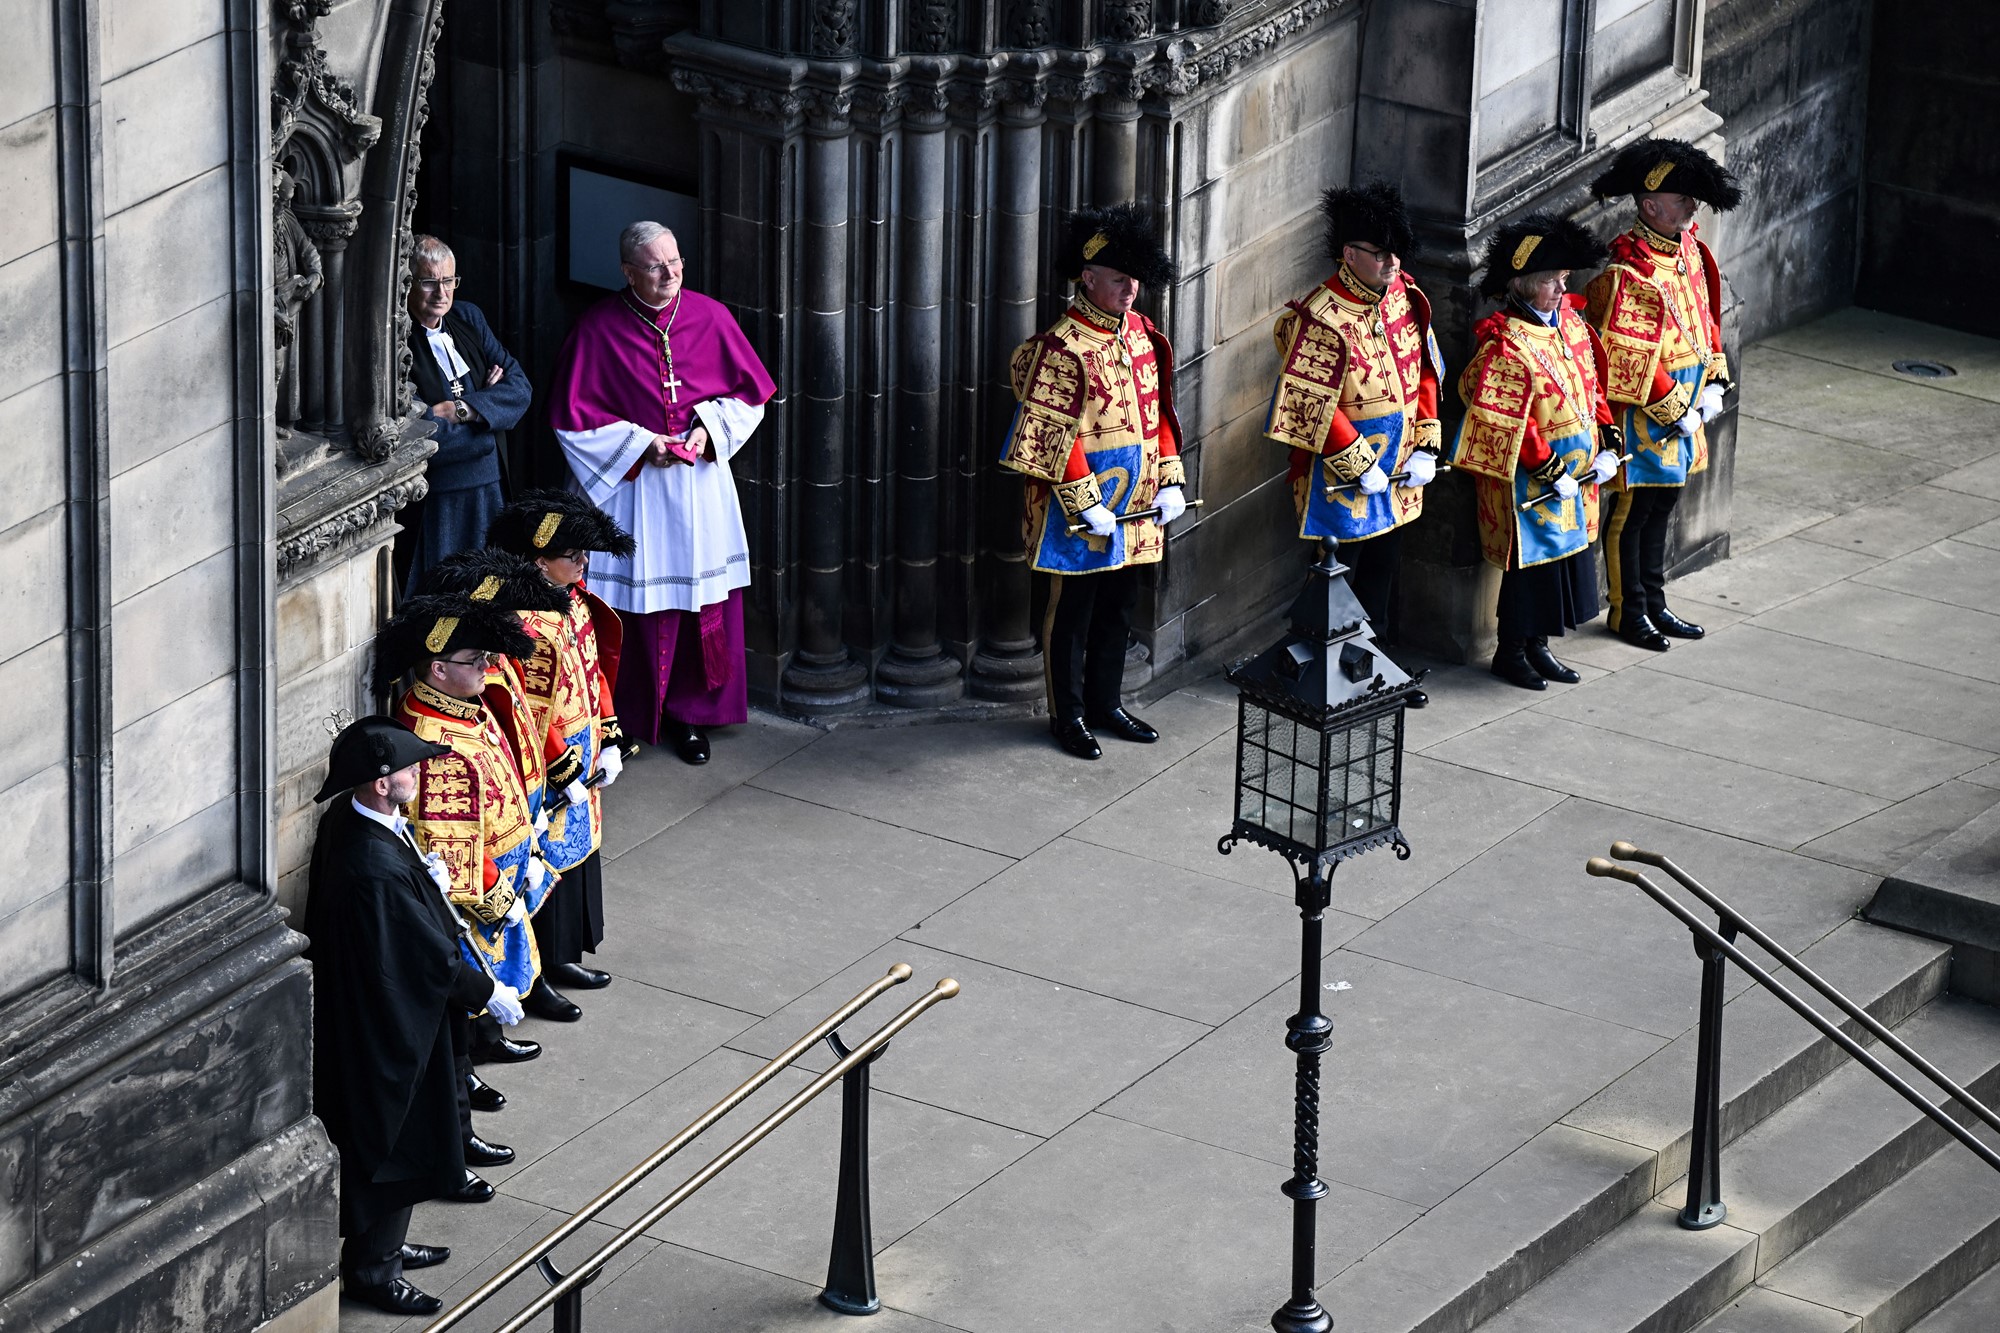 Heralds and Pursuivants of Scotland stand outside the entrance to St Giles' Cathedral, in Edinburgh, on September 12, 2022, ahead of a service of Thanksgiving for the life of Queen Elizabeth II.